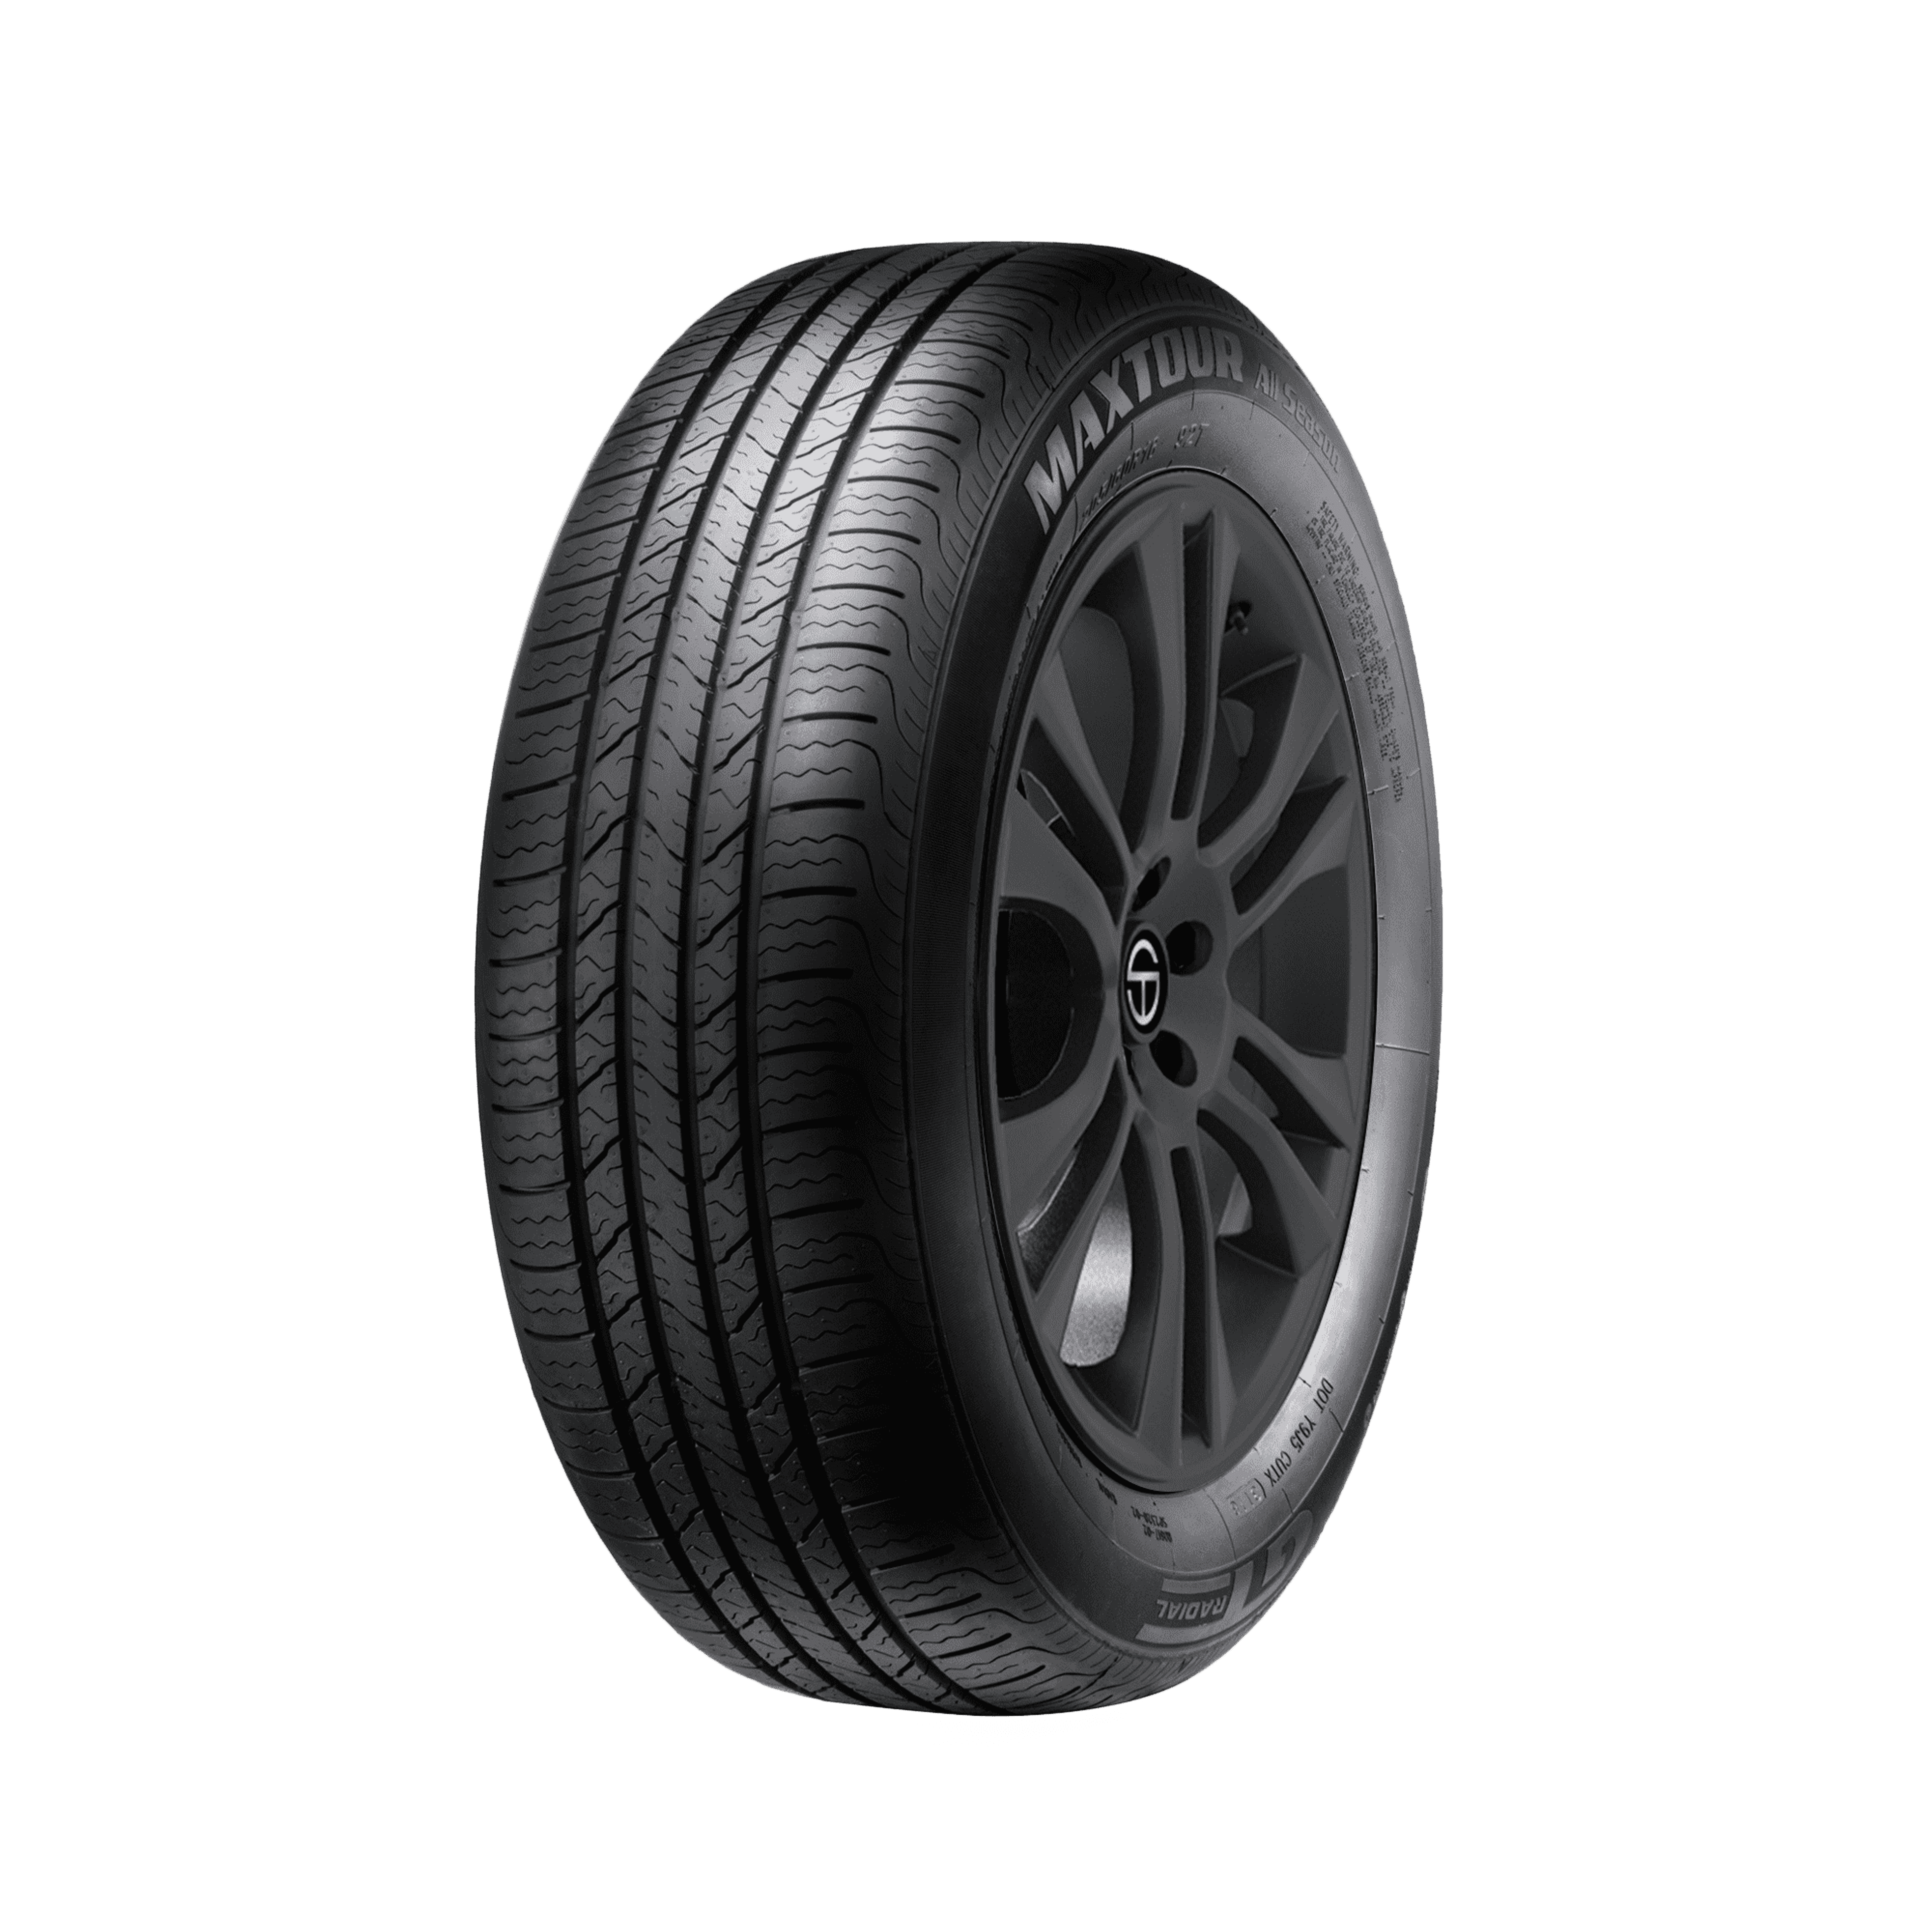 Buy GT Radial Maxtour | SimpleTire All Season Tires Online